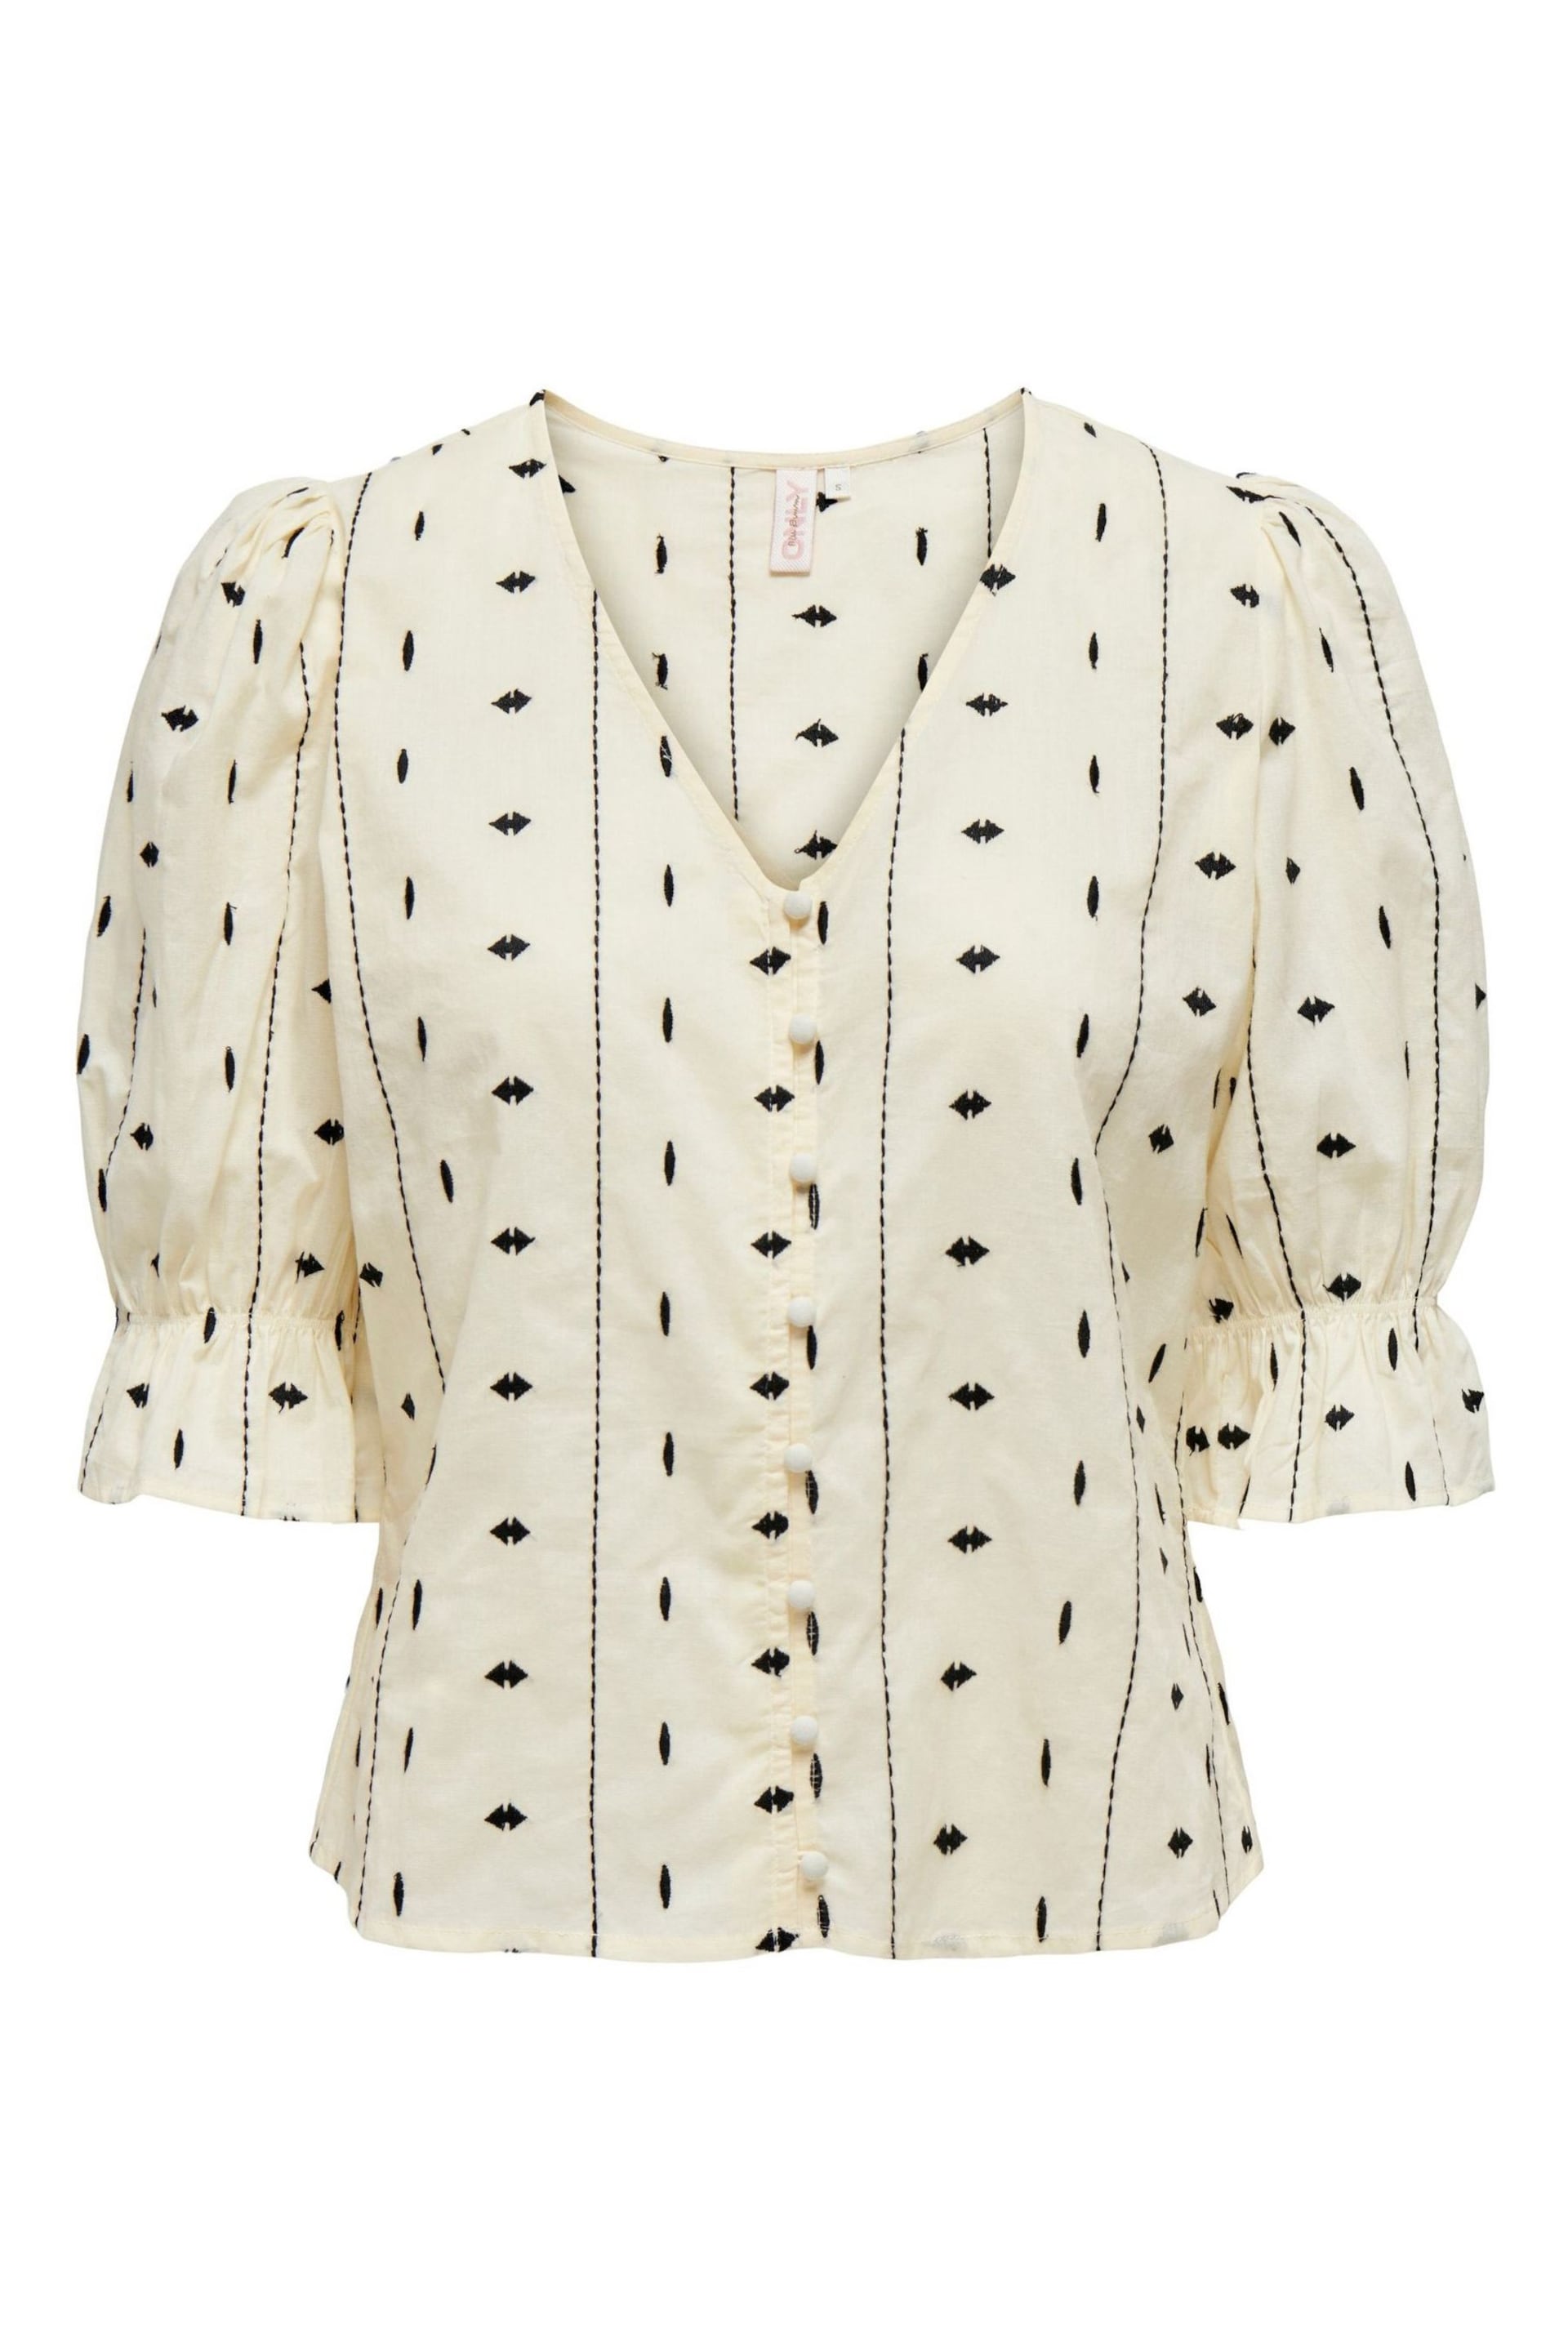 ONLY Cream Embroidered Short Sleeve Button Up Blouse - Image 7 of 8